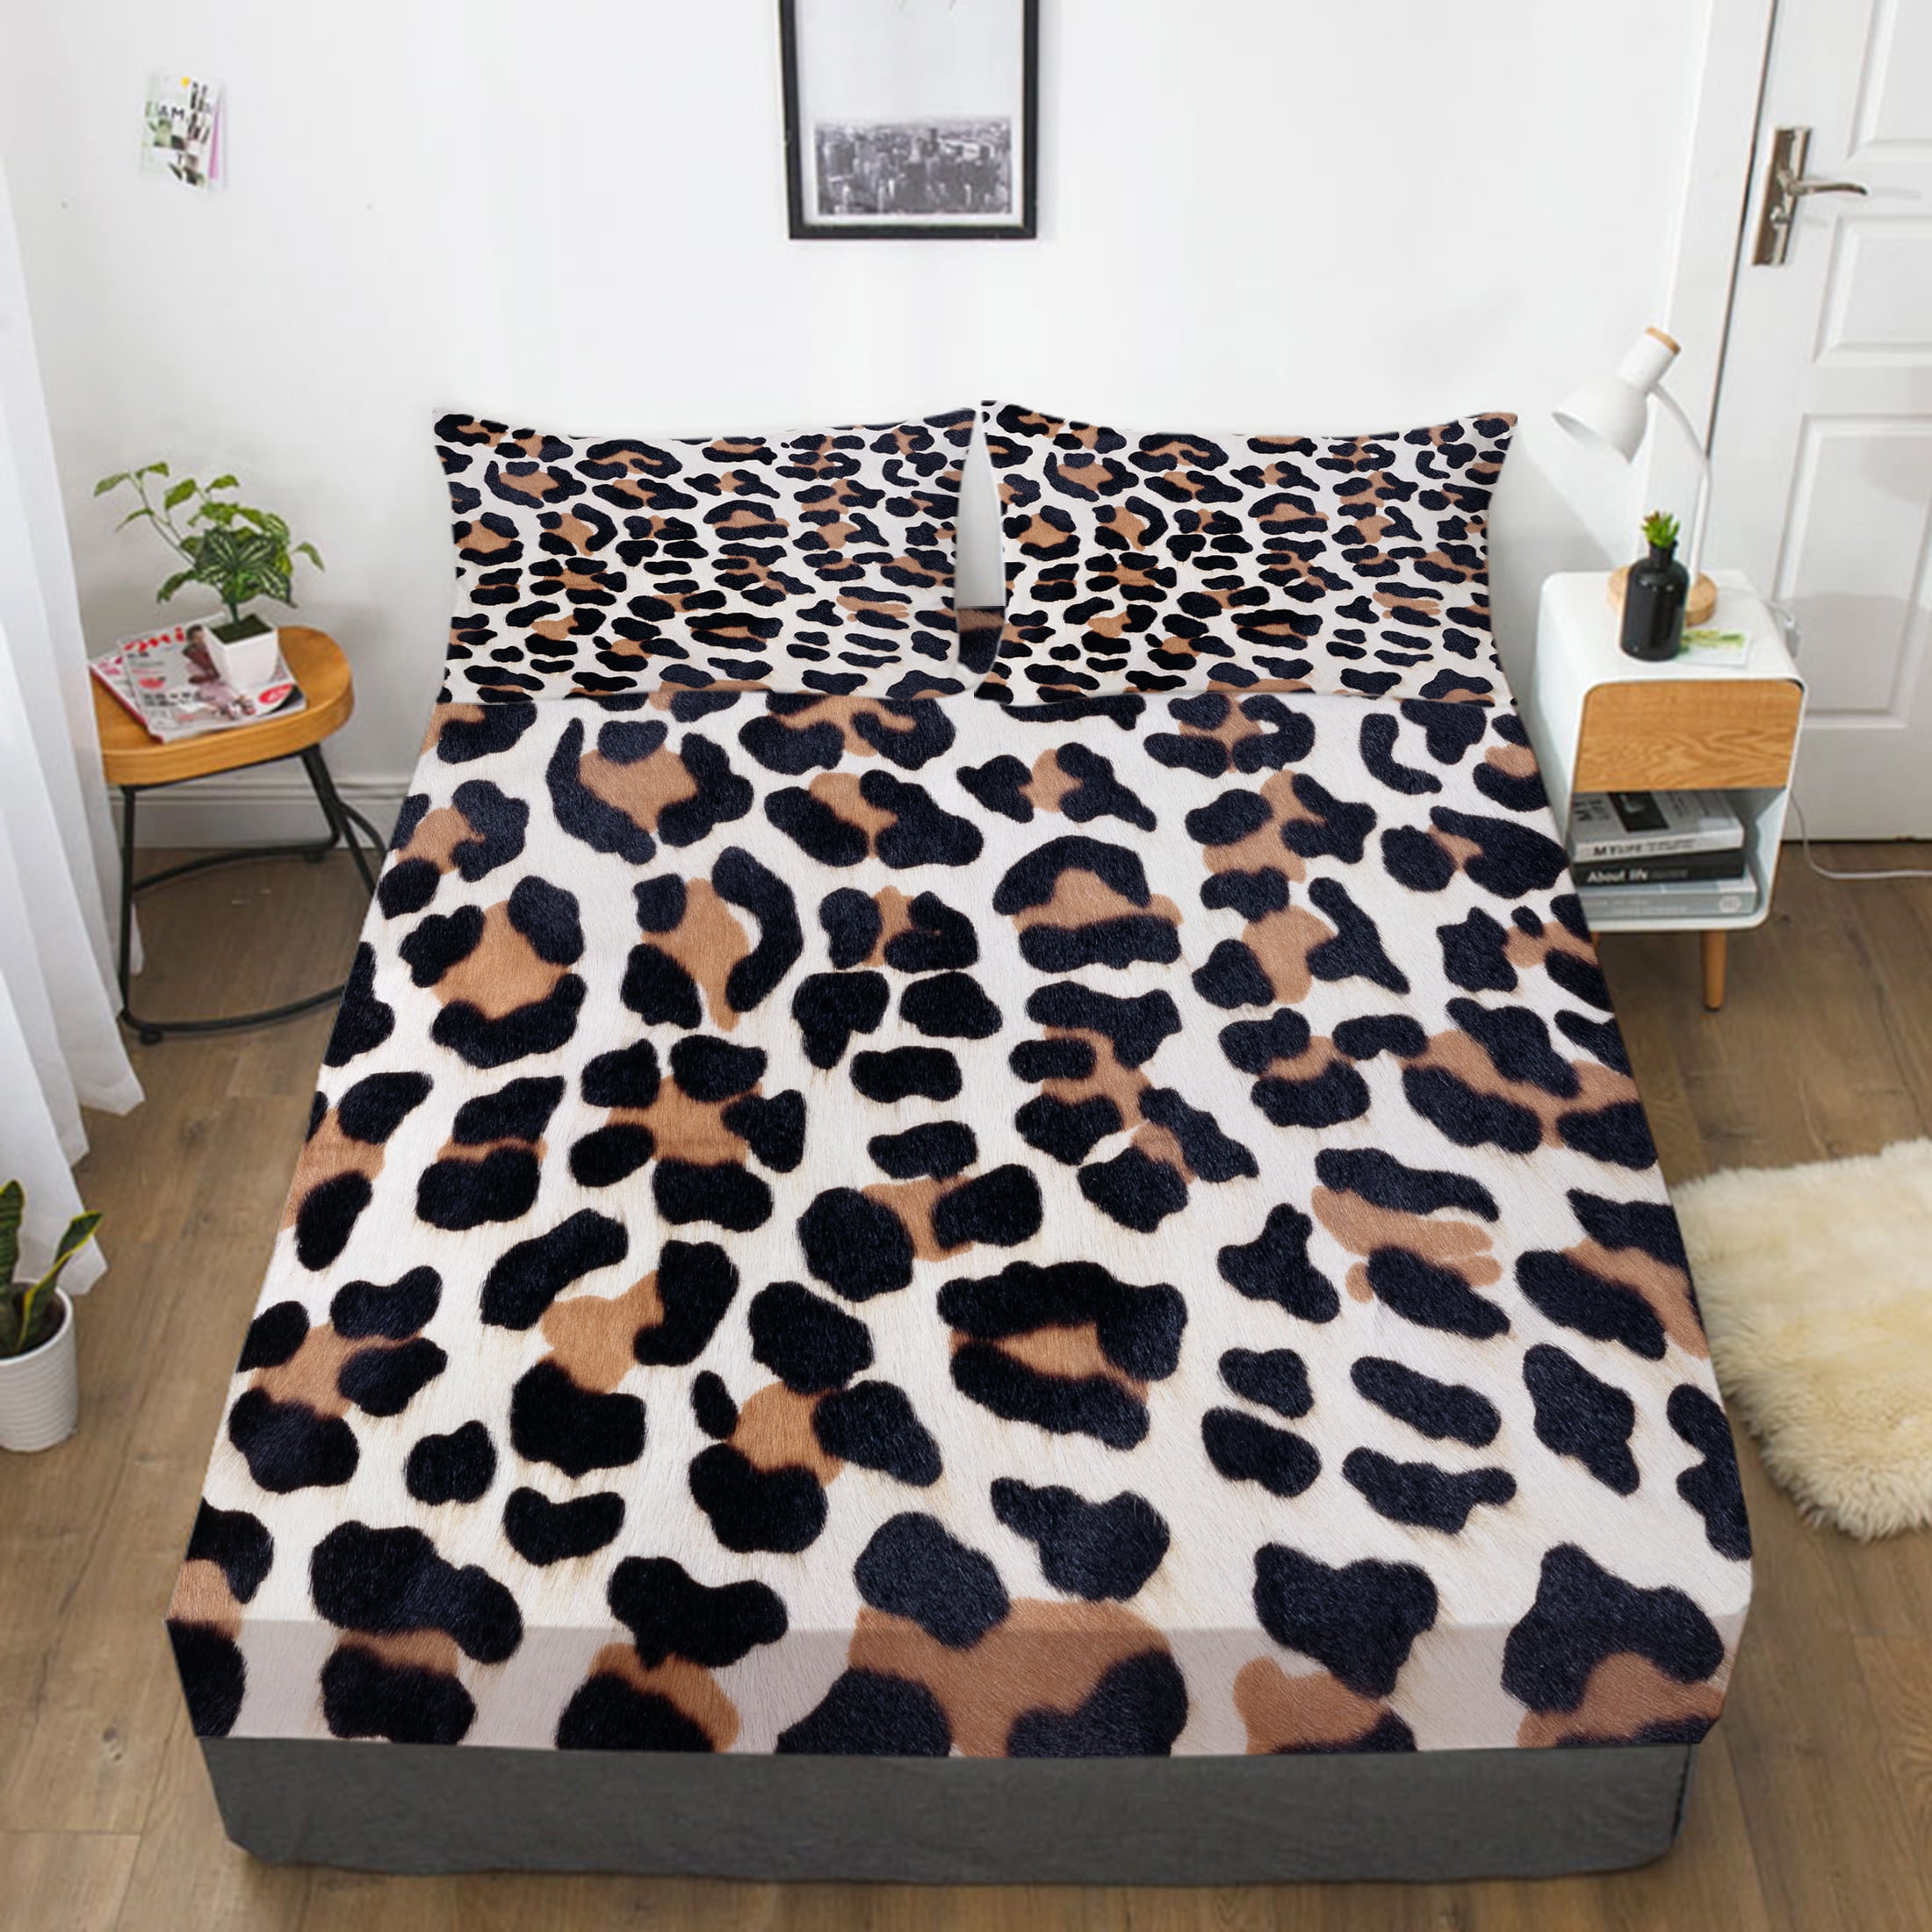 Where to Get Leopard Print Bedding and Decor